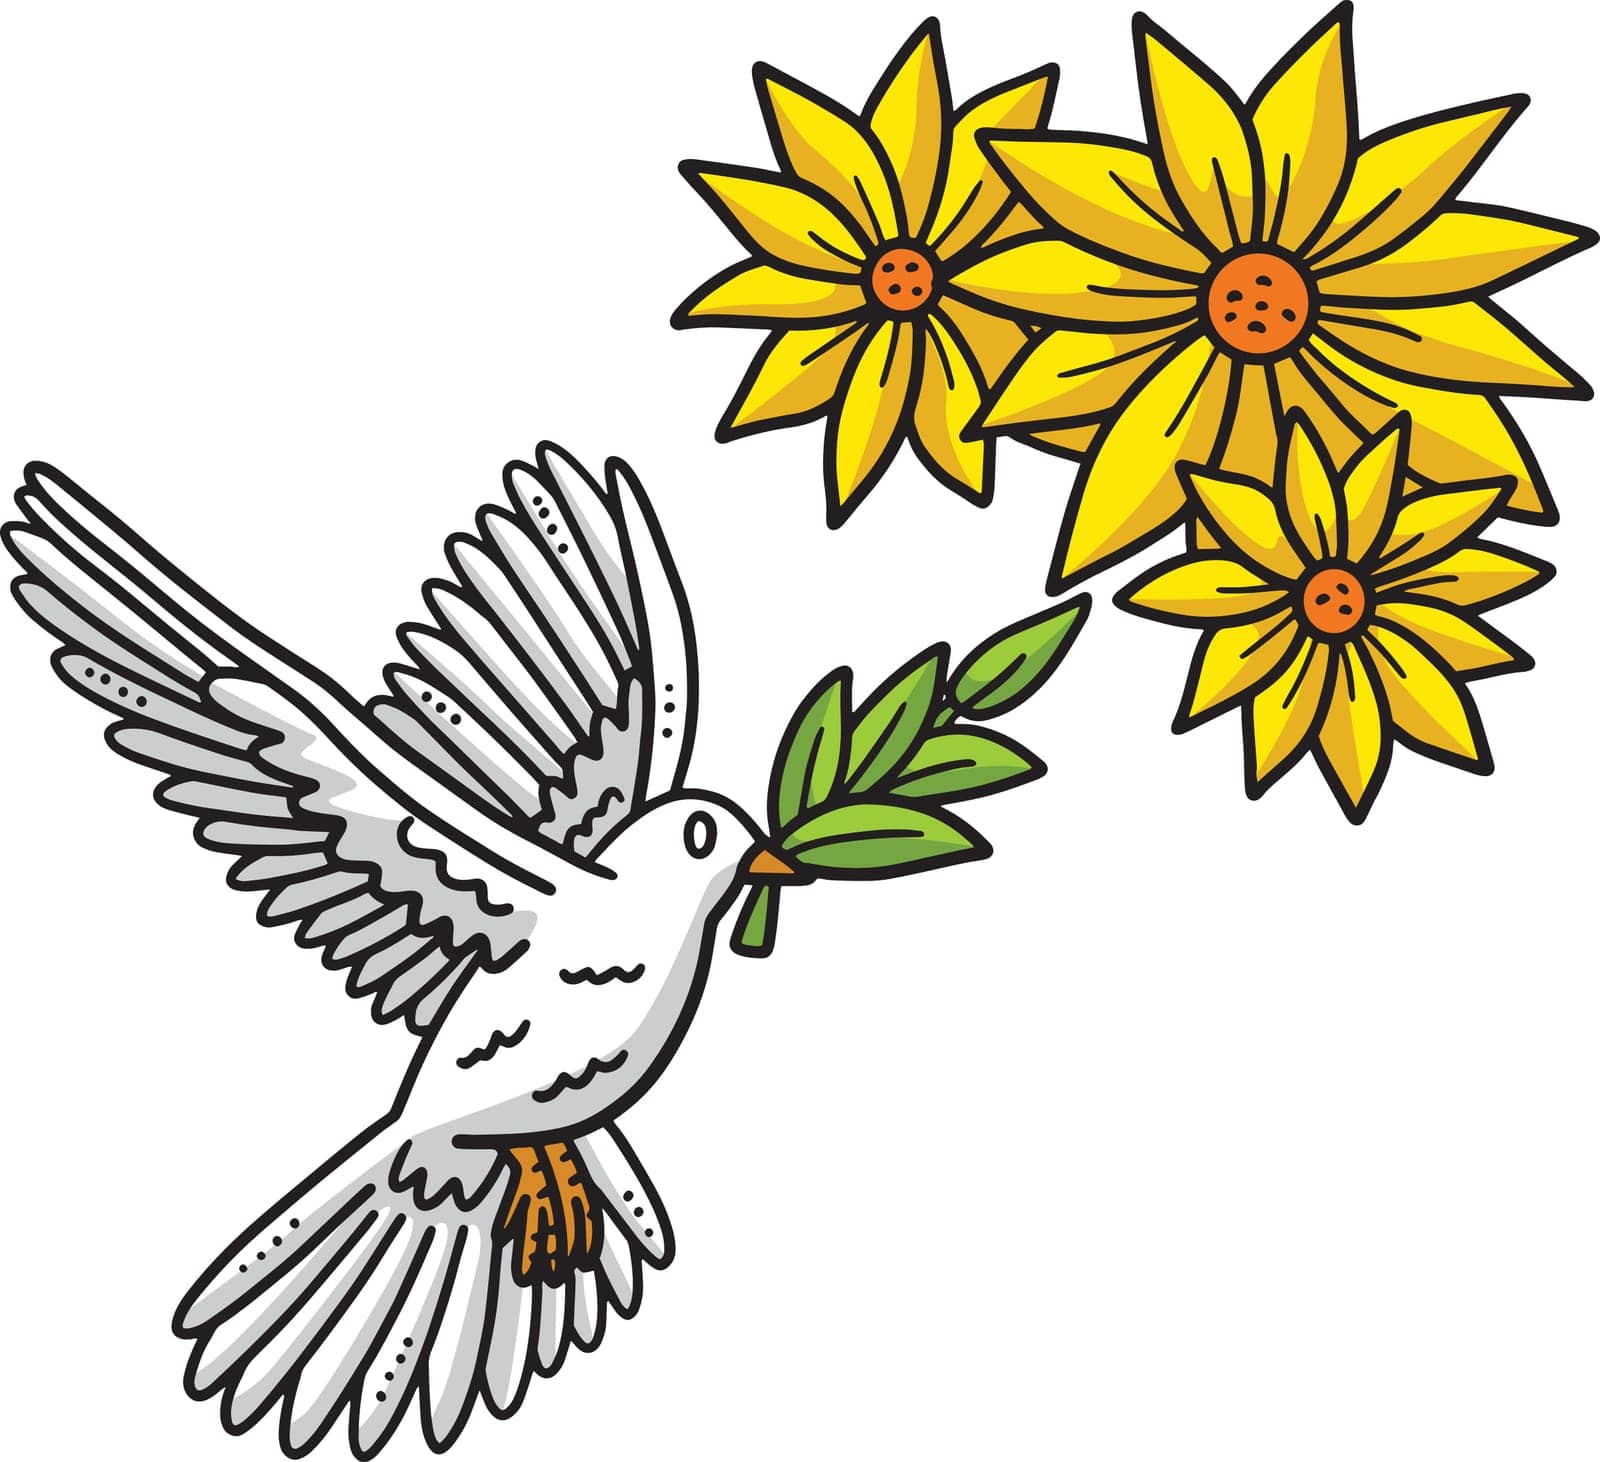 This cartoon clipart shows a Bird and Flower illustration